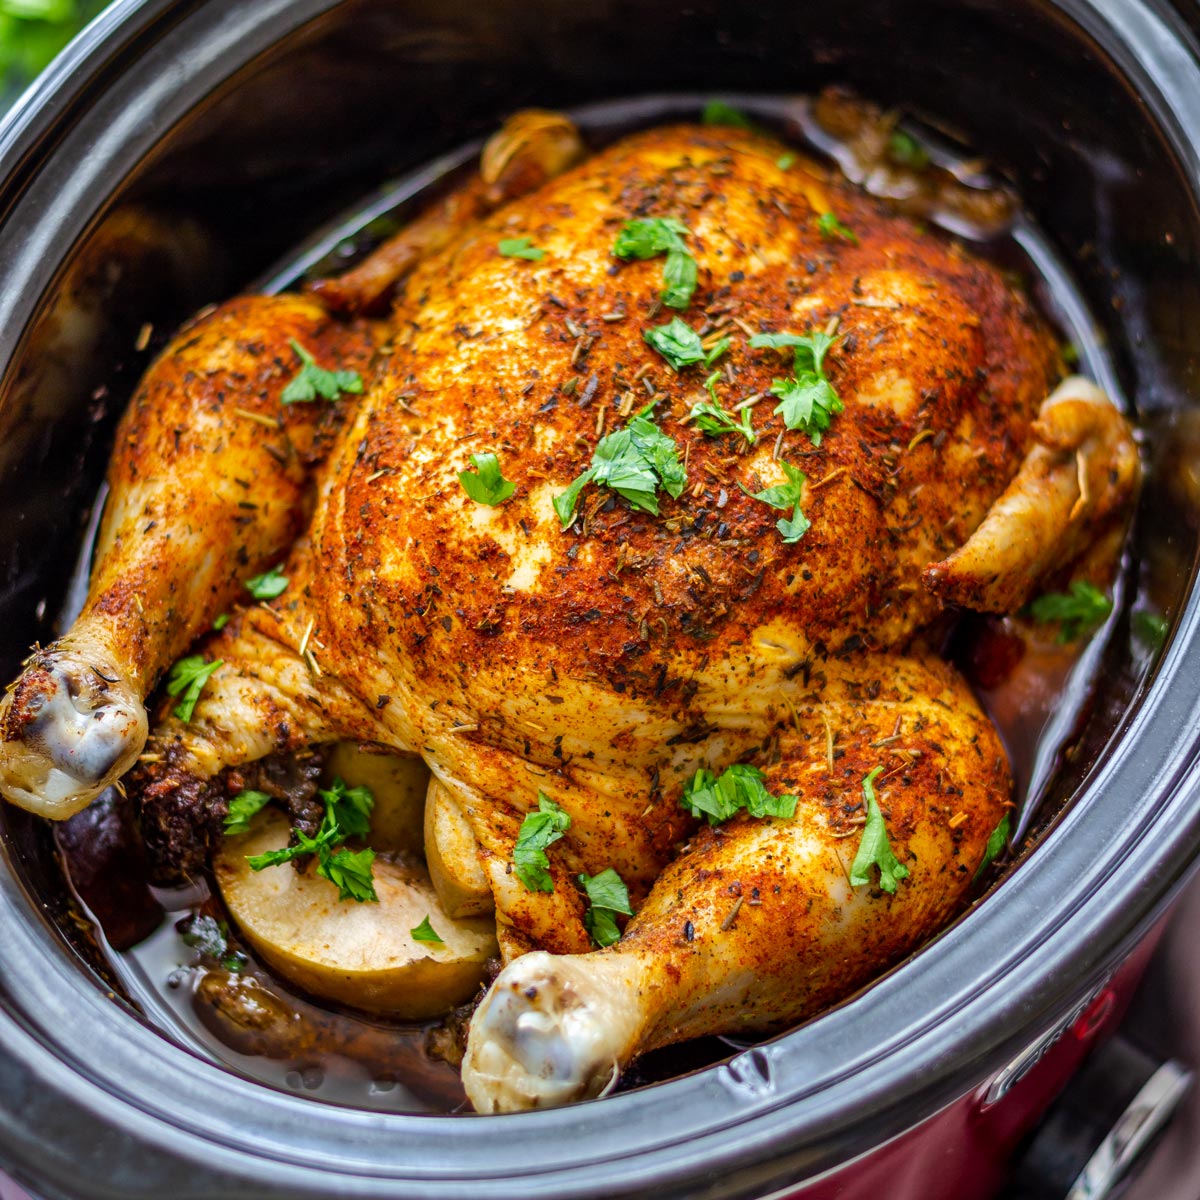 Thanksgiving Chicken Recipe : Whole Roasted Chipotle Chicken Recipe Purewow / Place the chicken